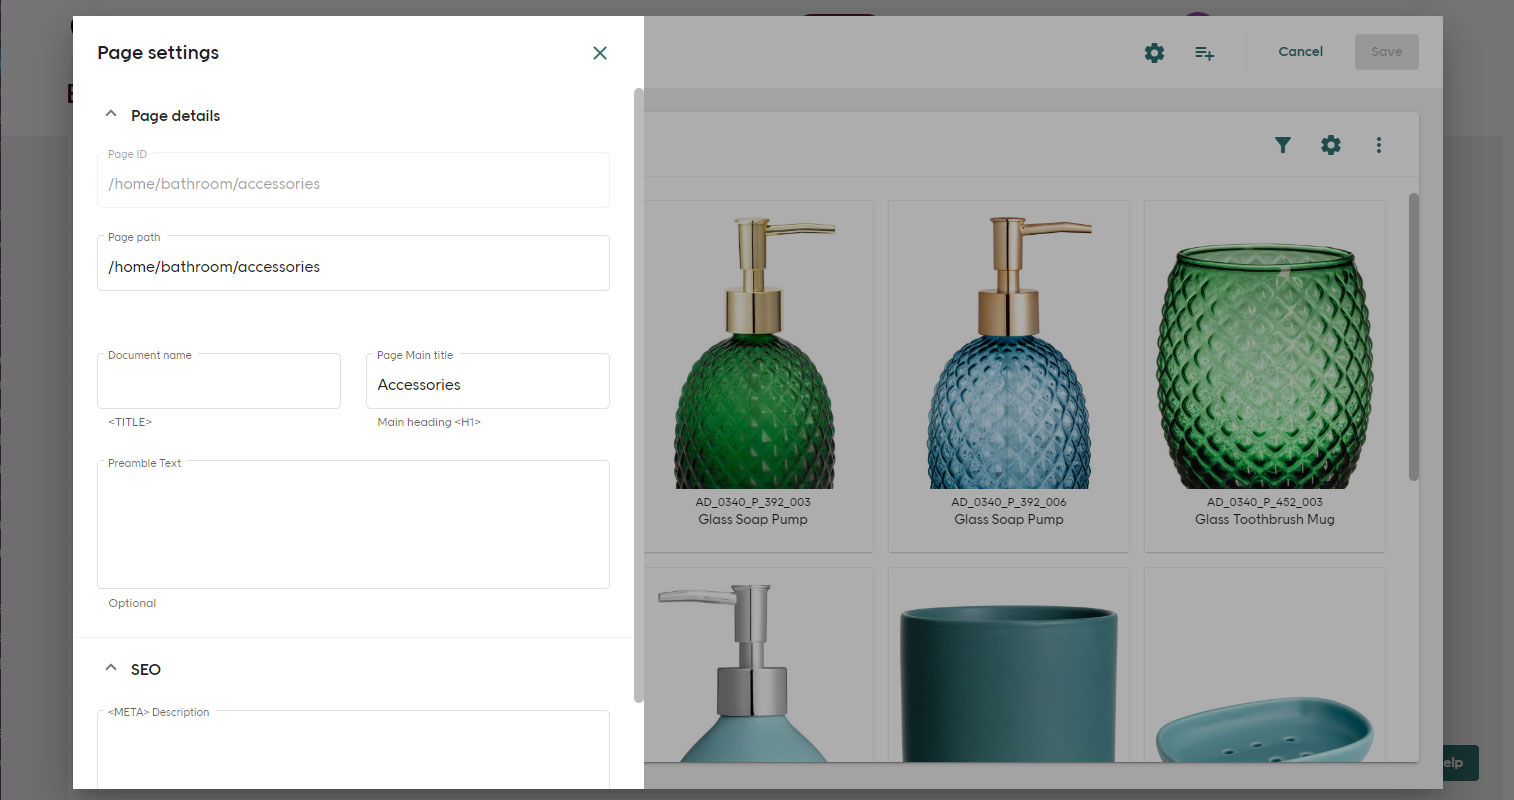 Screenshot of Category and Landing Page - Page settings